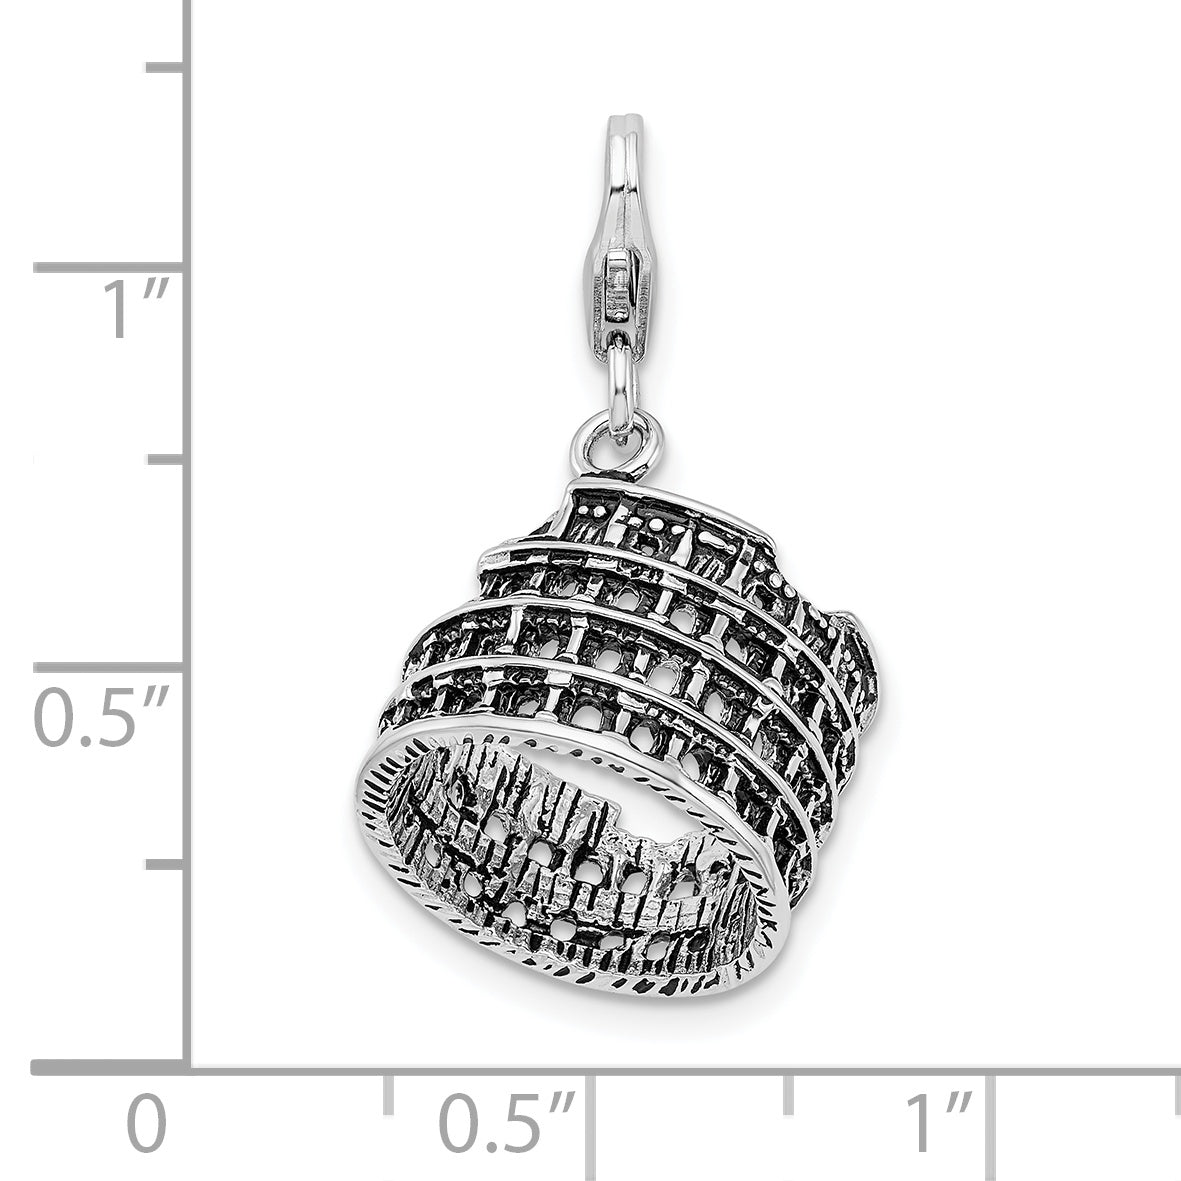 Amore La Vita Sterling Silver Rhodium-plated Polished 3-D Antiqued Coliseum Charm with Fancy Lobster Clasp